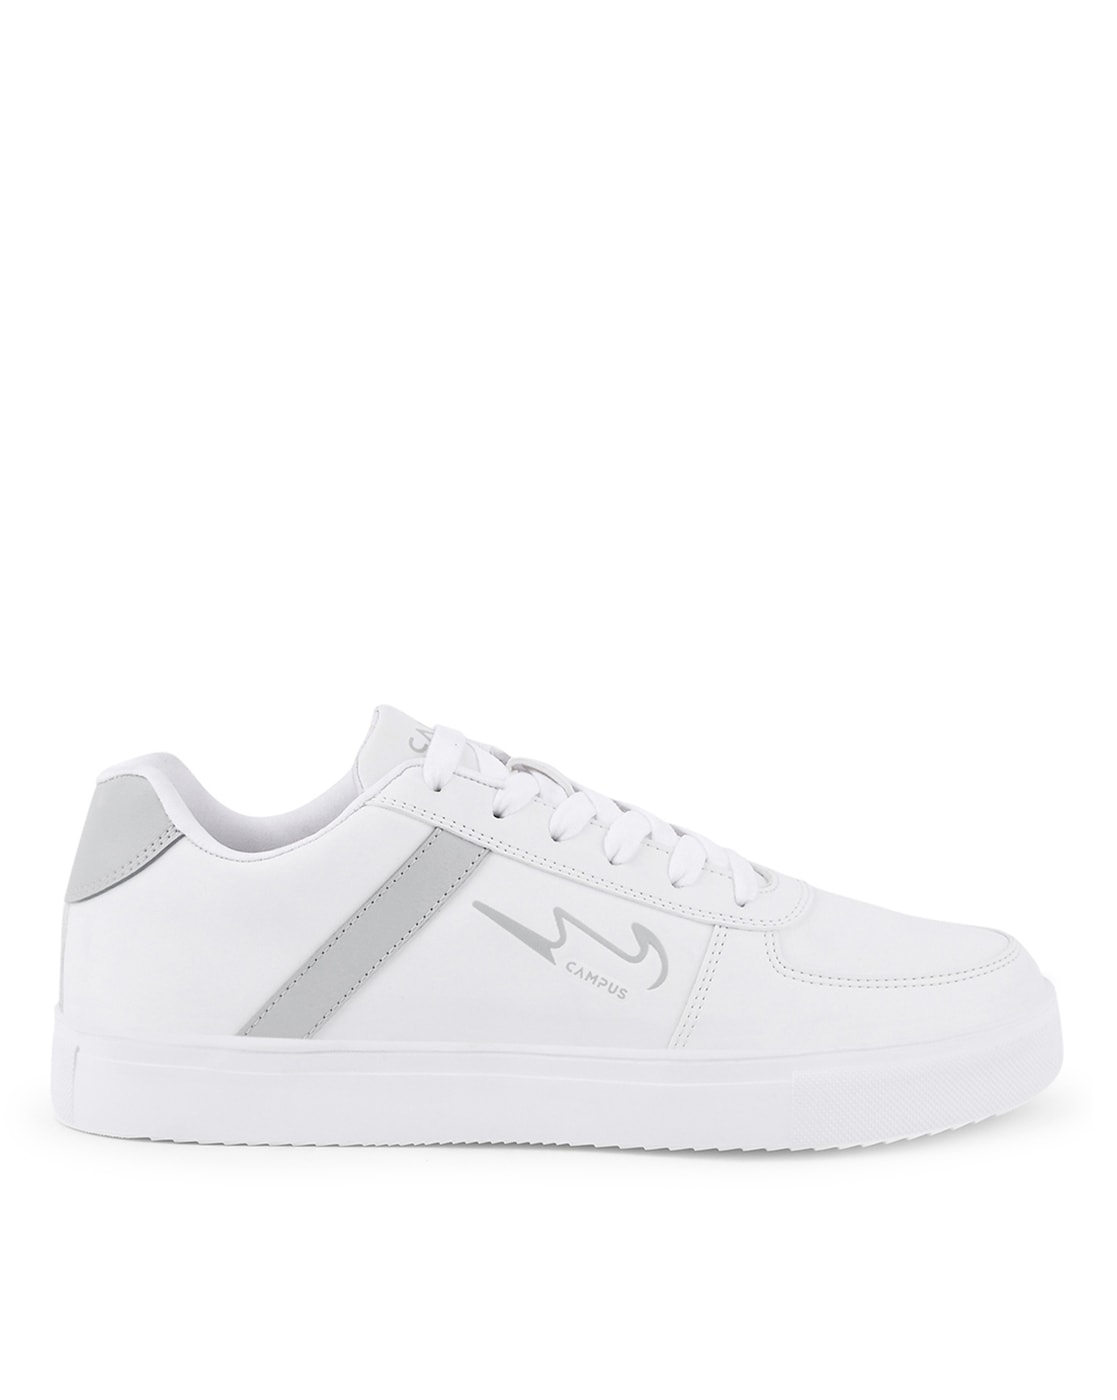 Explore more than 155 campus white sneakers